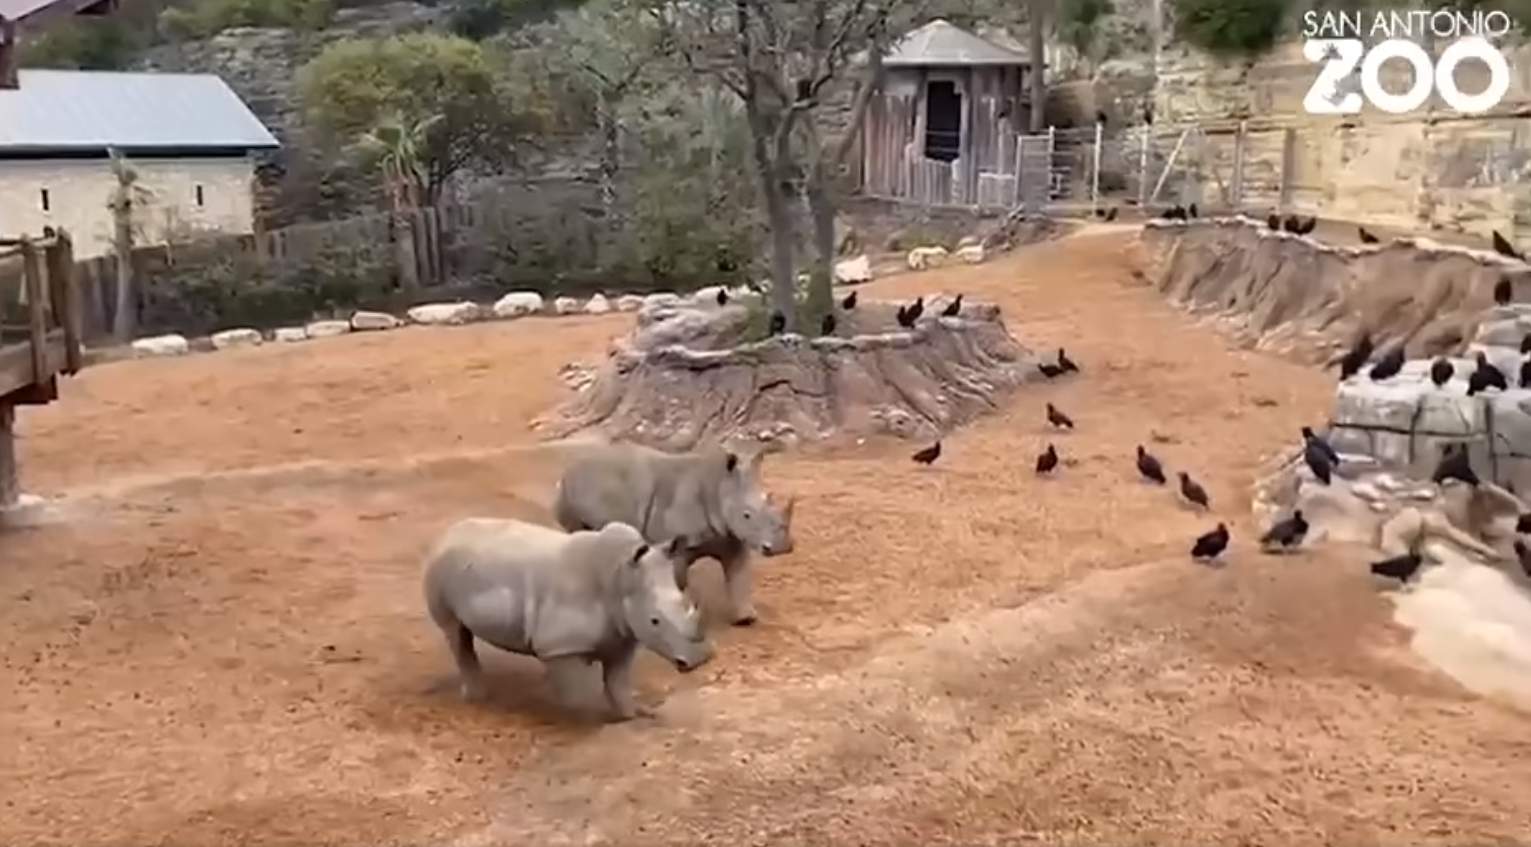 Animals at this Texas zoo roam freely between habitats for the first time in history